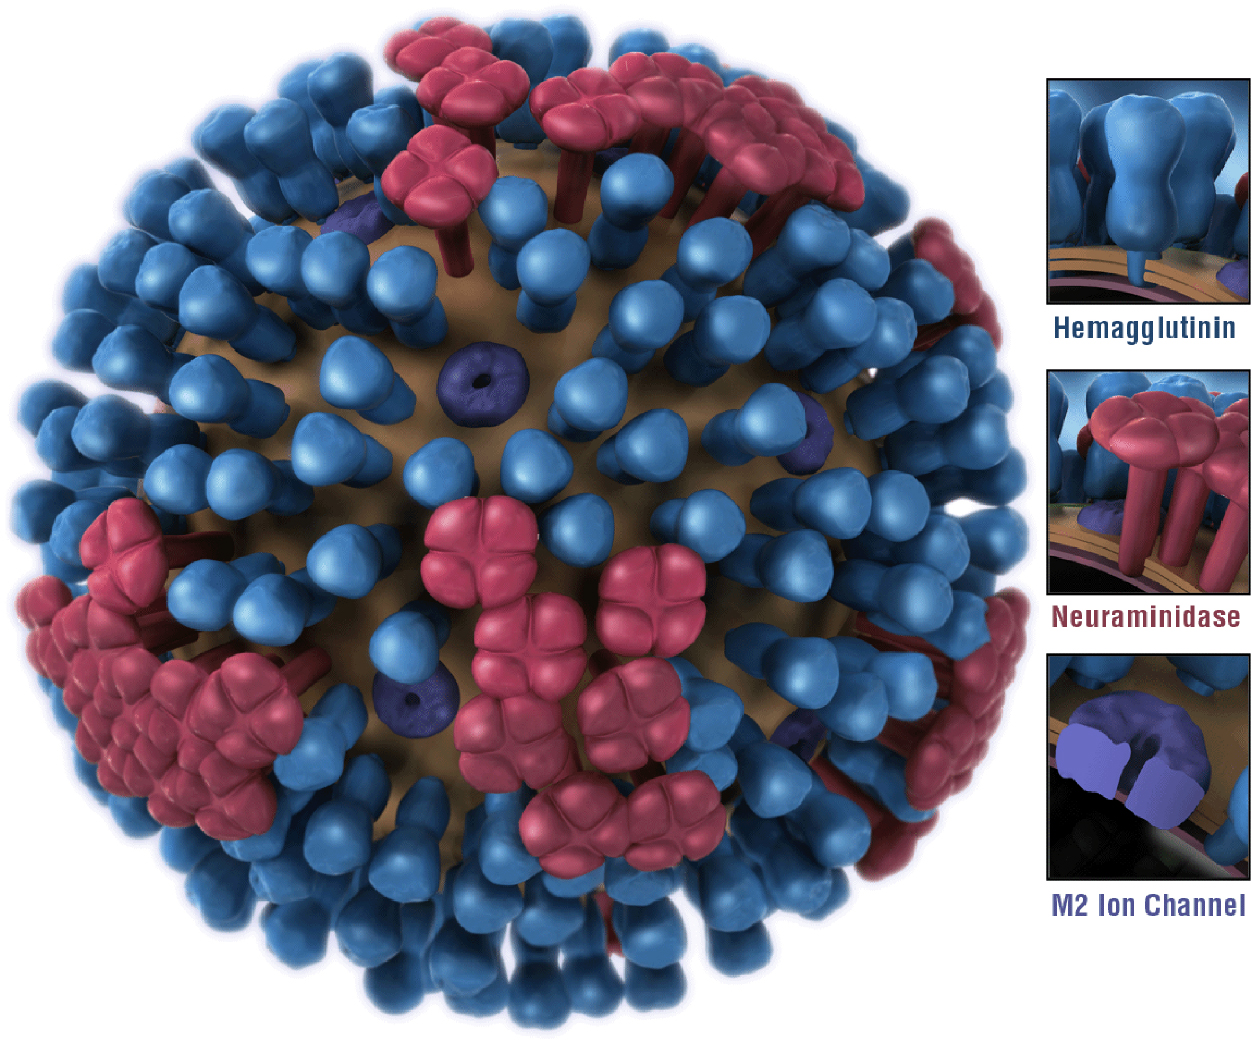 A 3D model of the influenza virus illustrating the proteins exposed on the surface